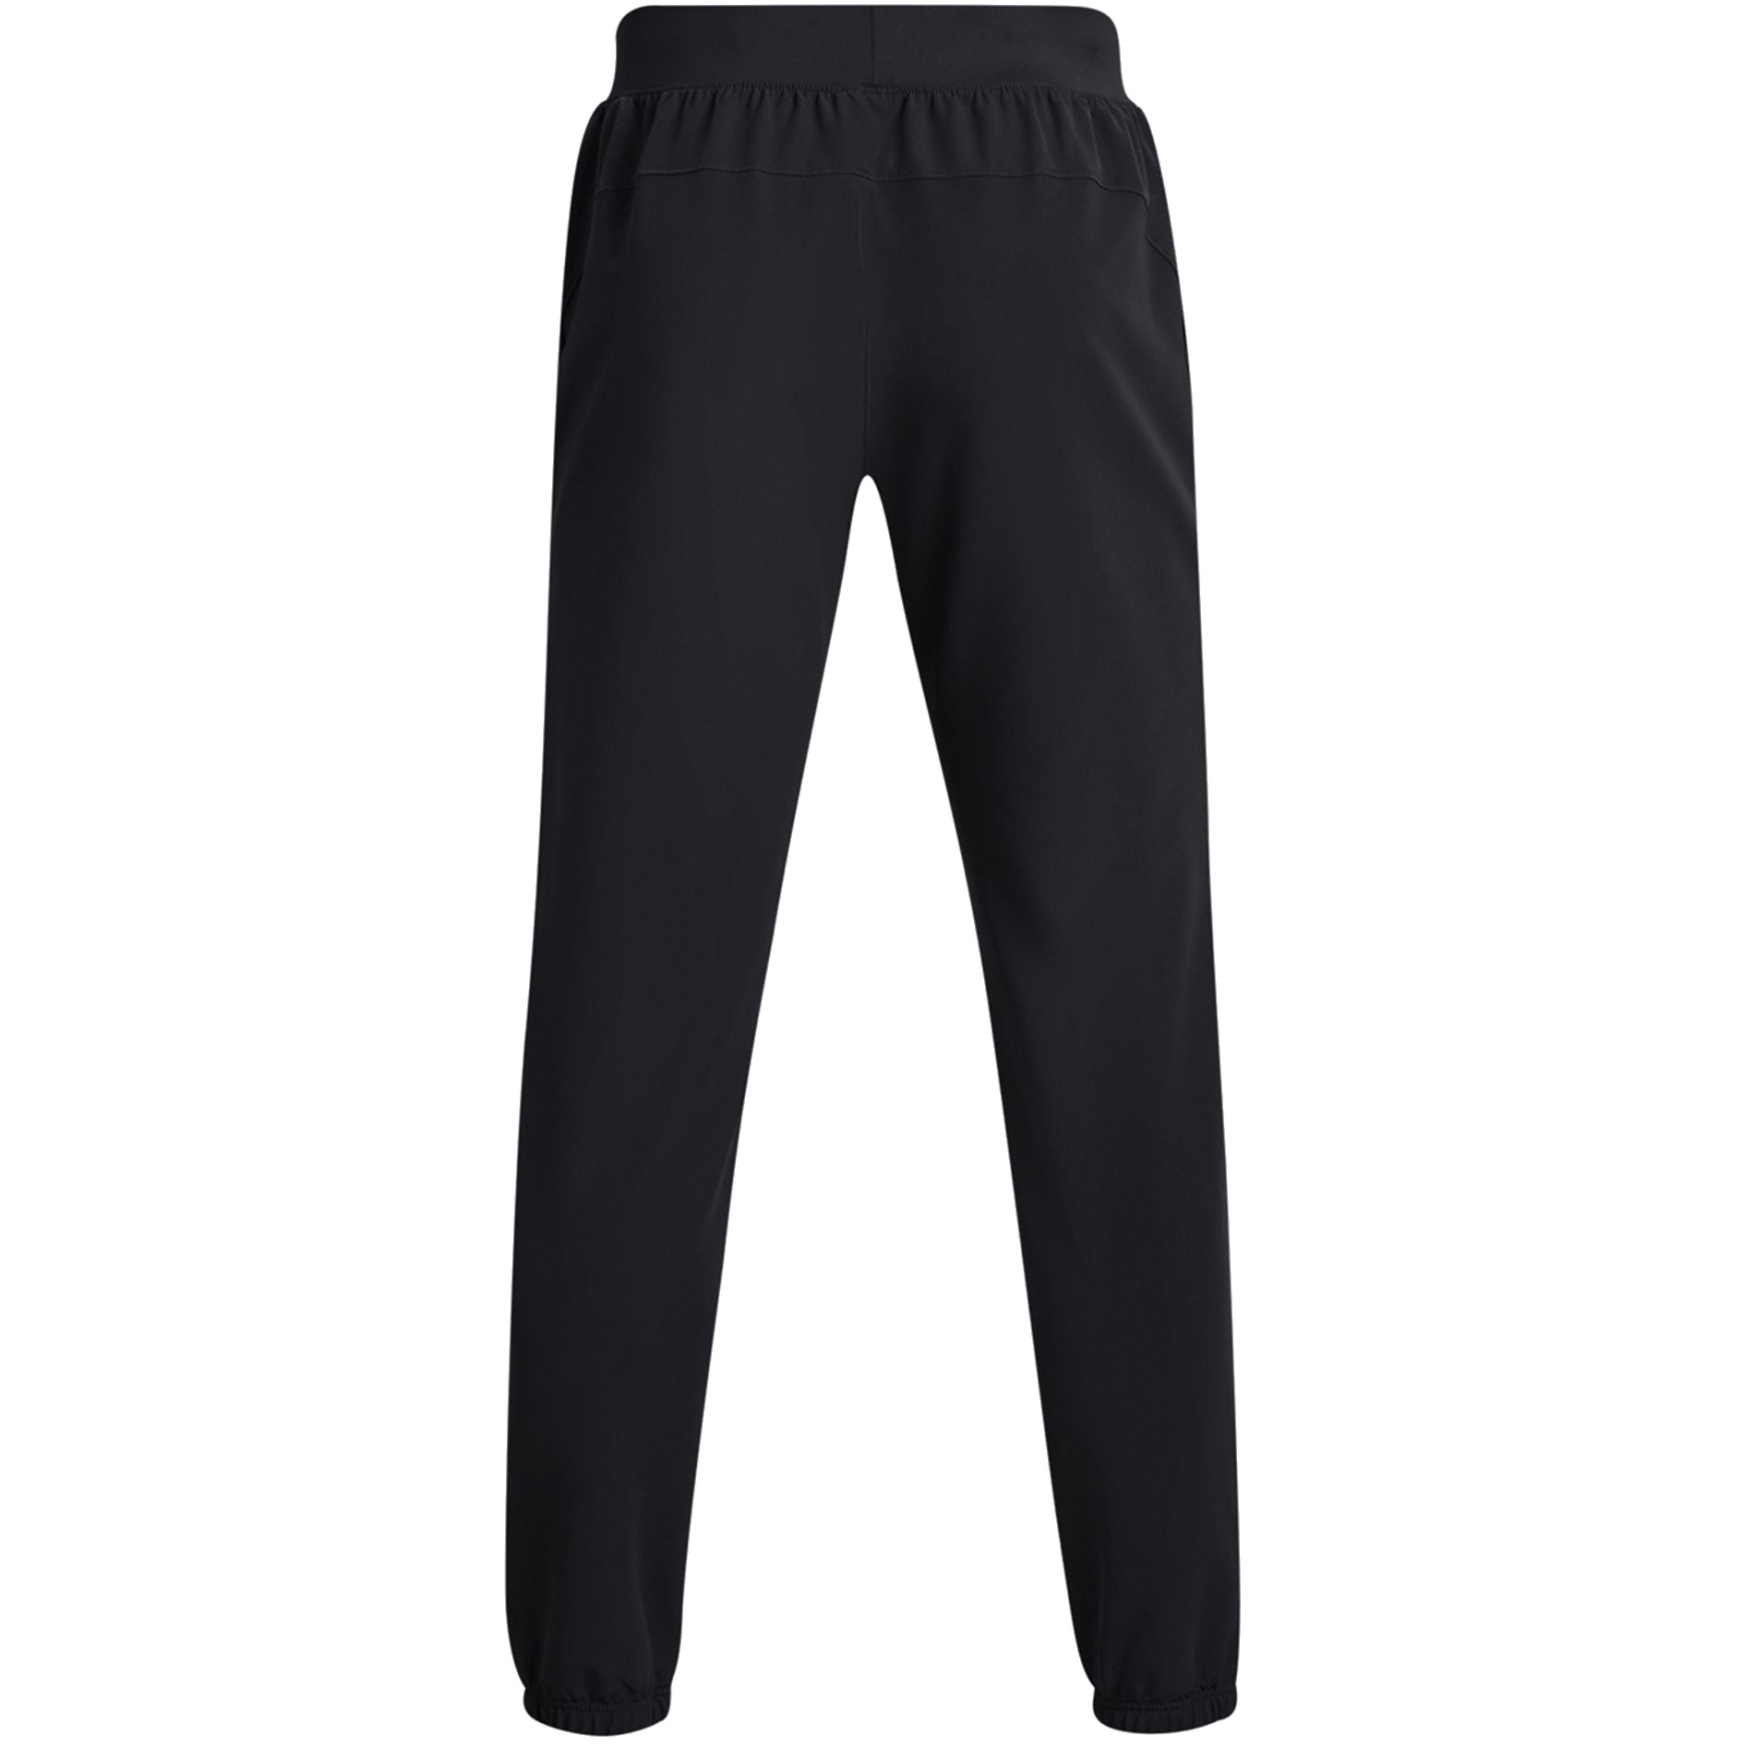 Under Armour Youth Boys' Stretch Tech Woven Pant